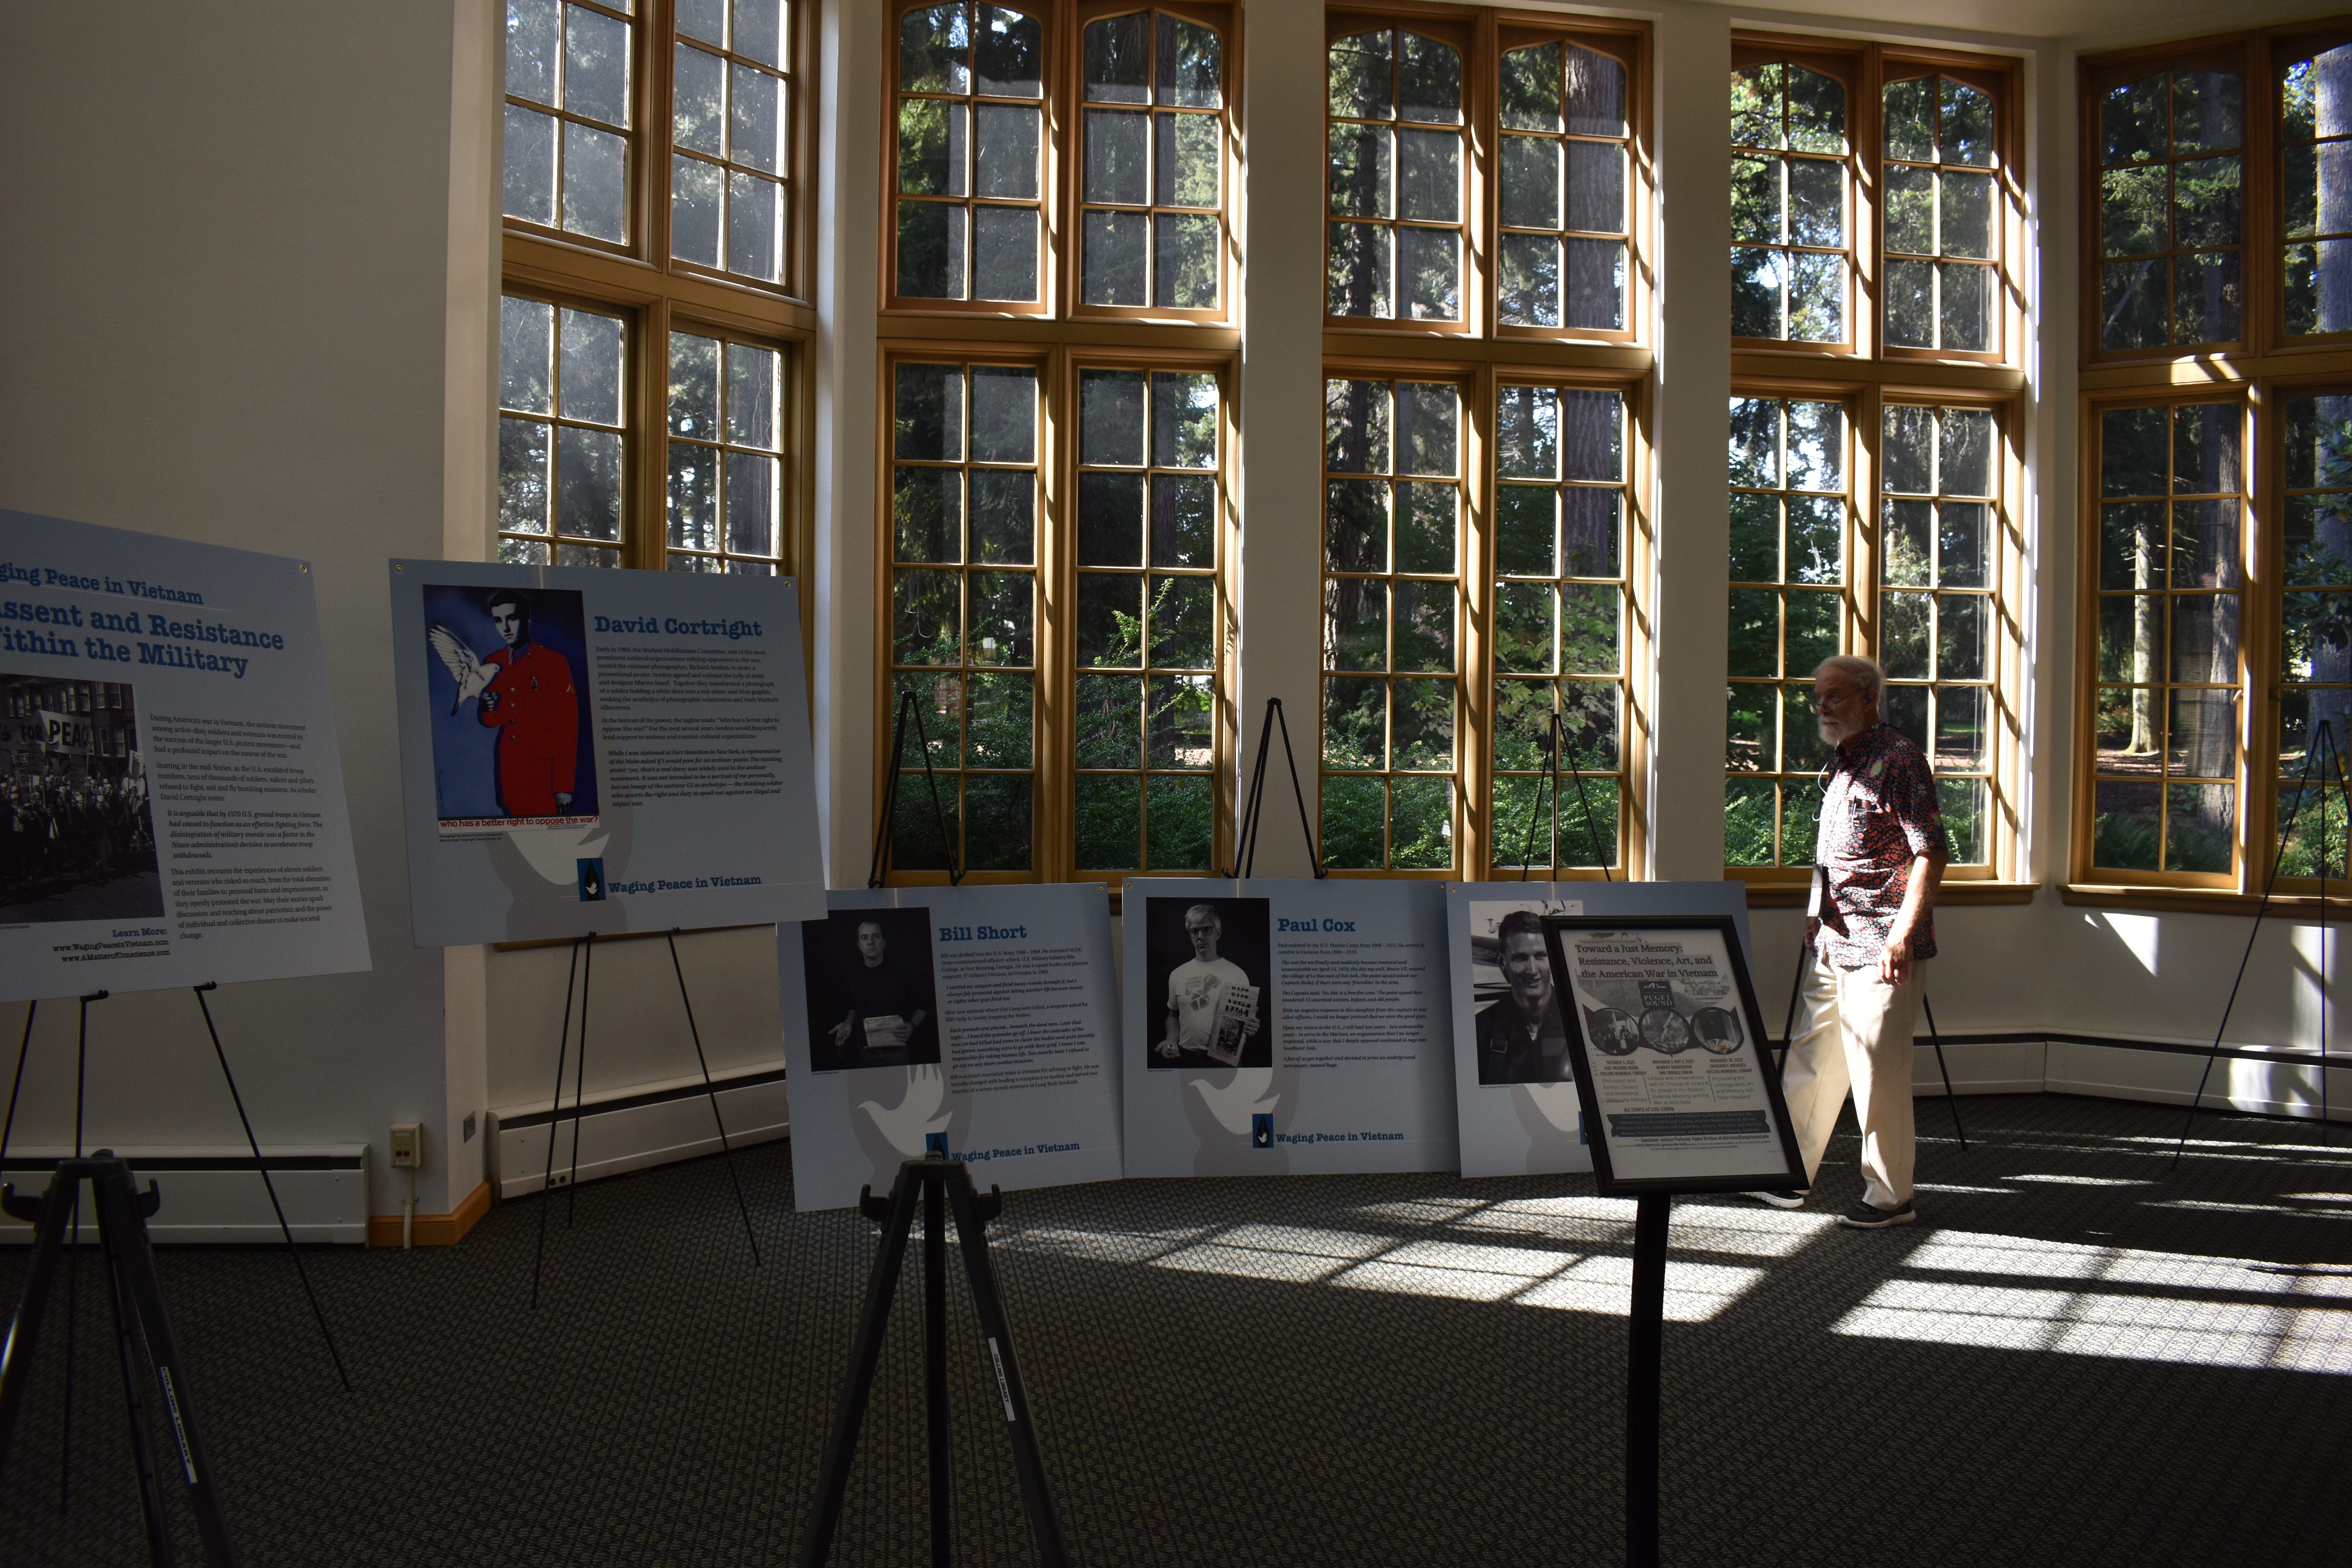 David Dittemore joined Ron Carver to install the exhibit at the University of Puget Sound. Photo by Lauren Gallup.